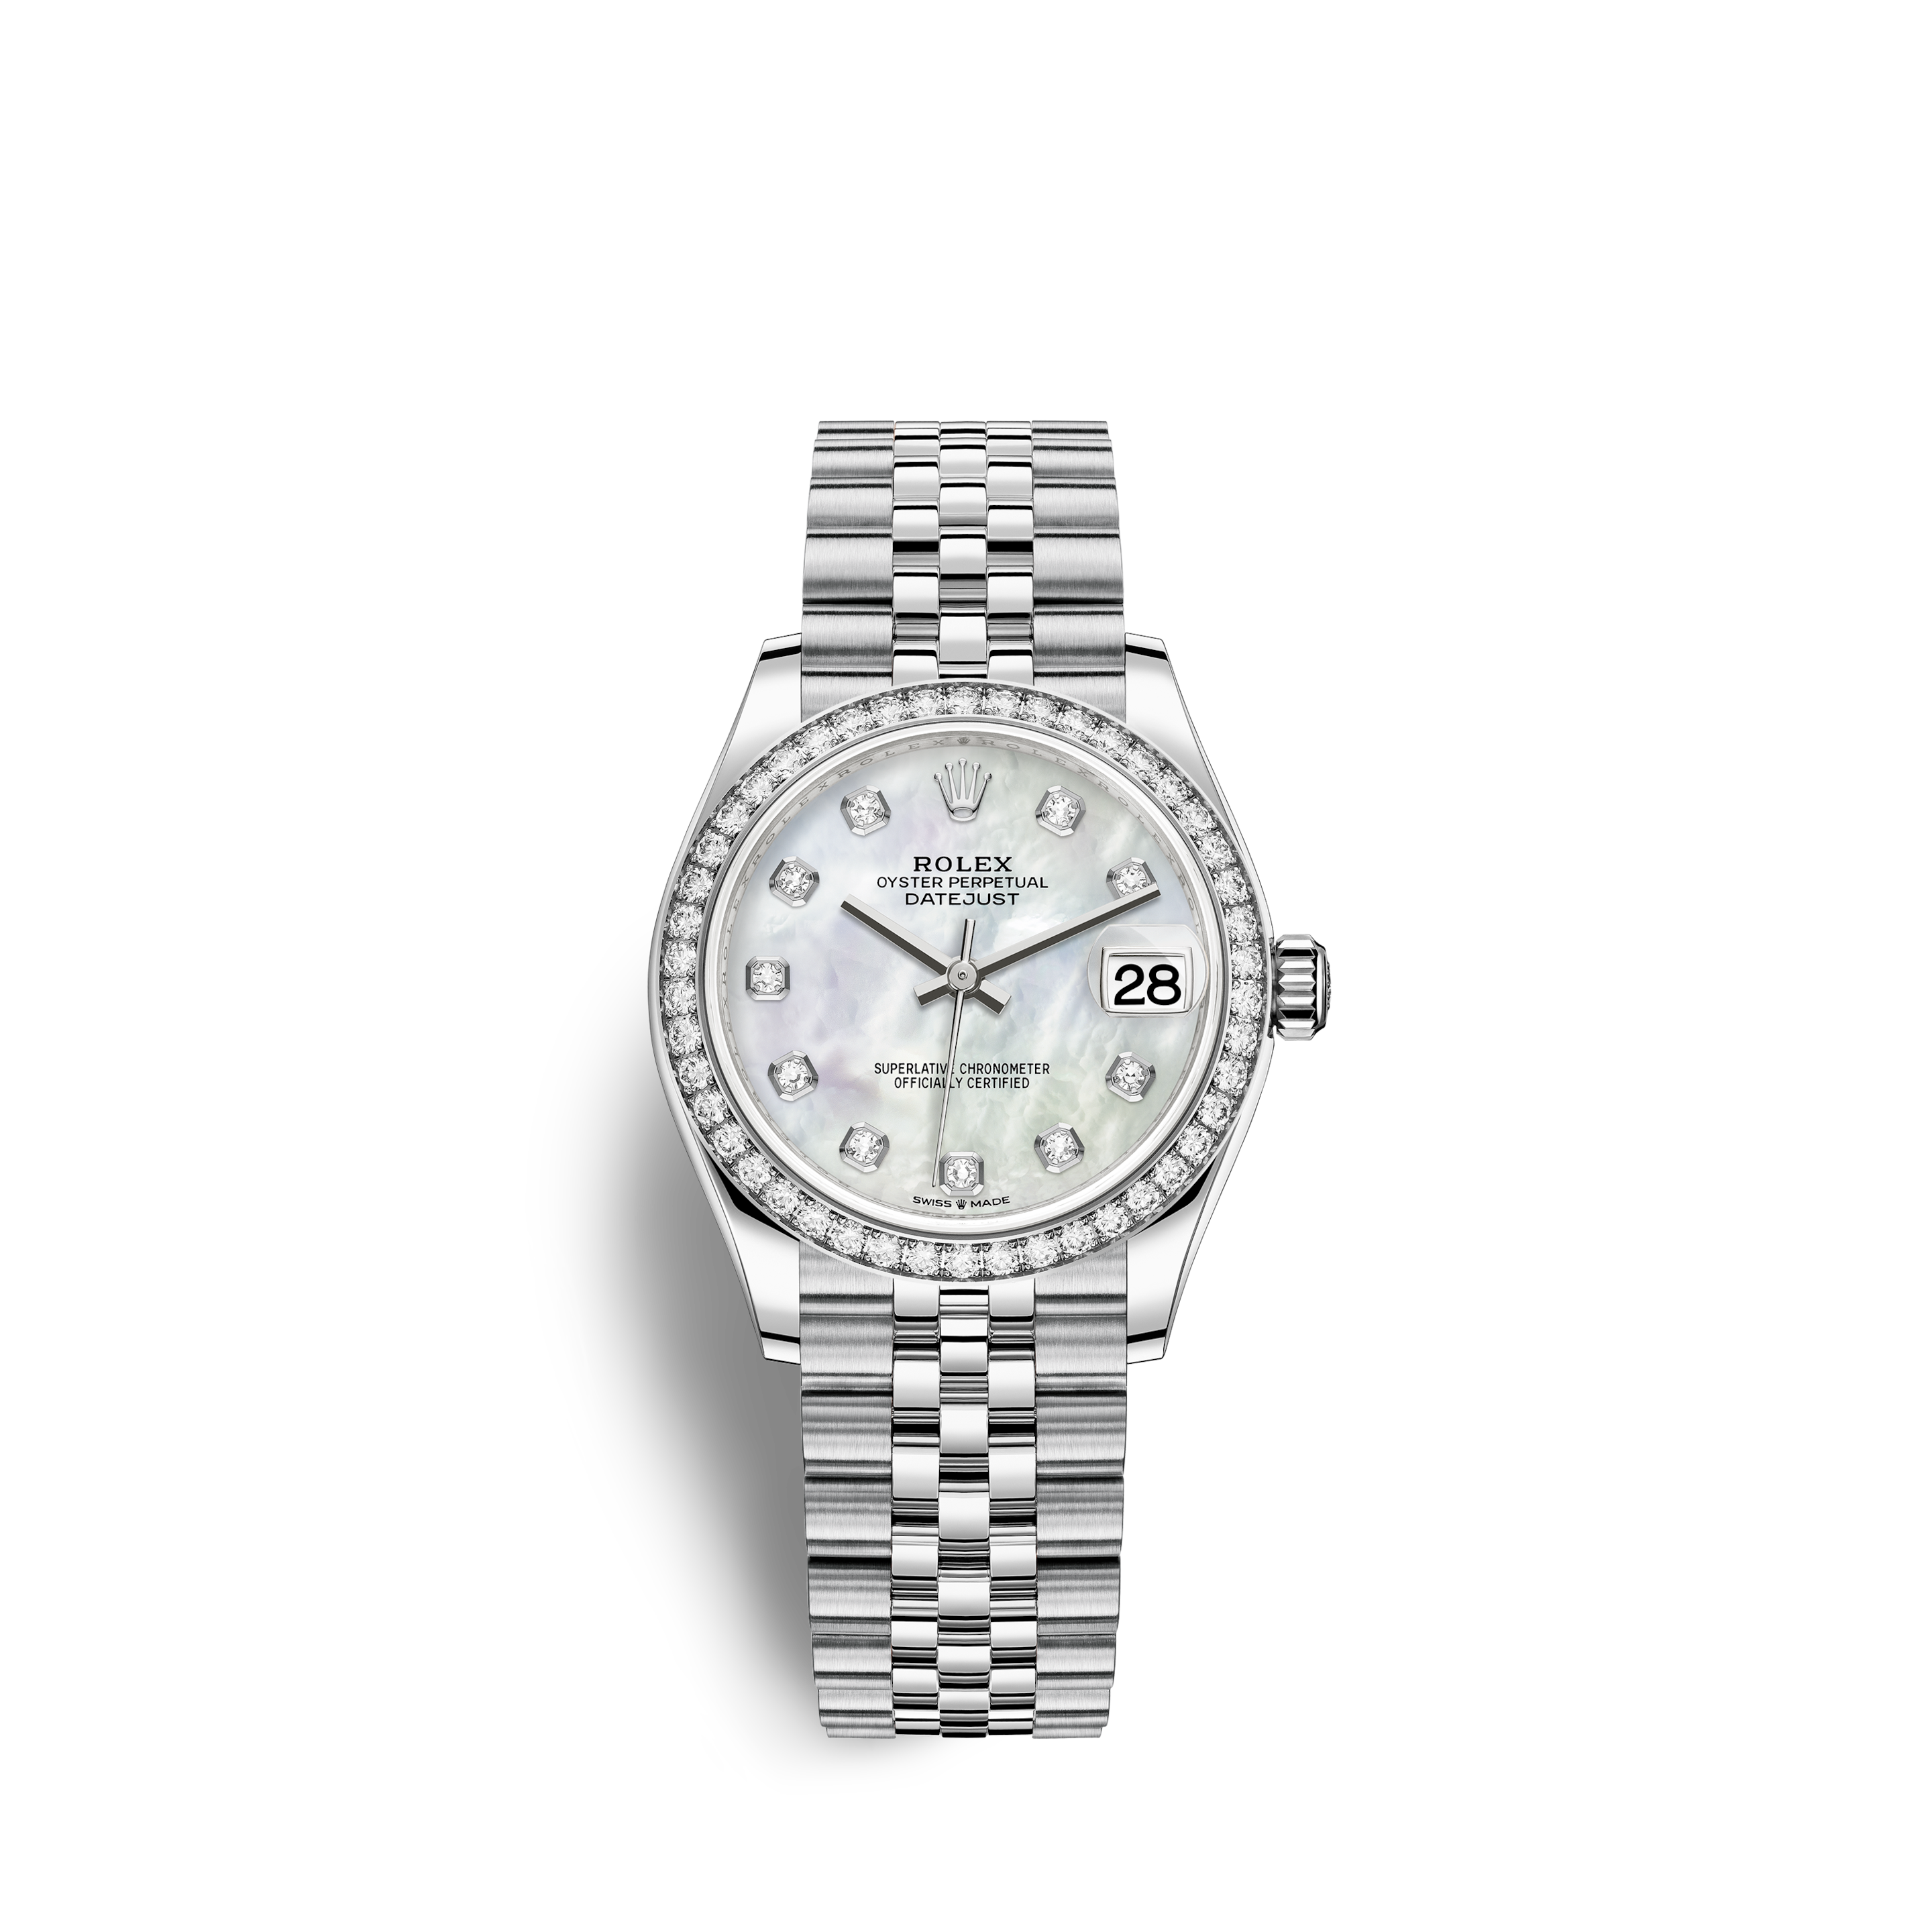 Rolex Datejust, 126231, steel + 18K Rose-Gold, grey dial with 6 and 9 diamonds, Rehaut